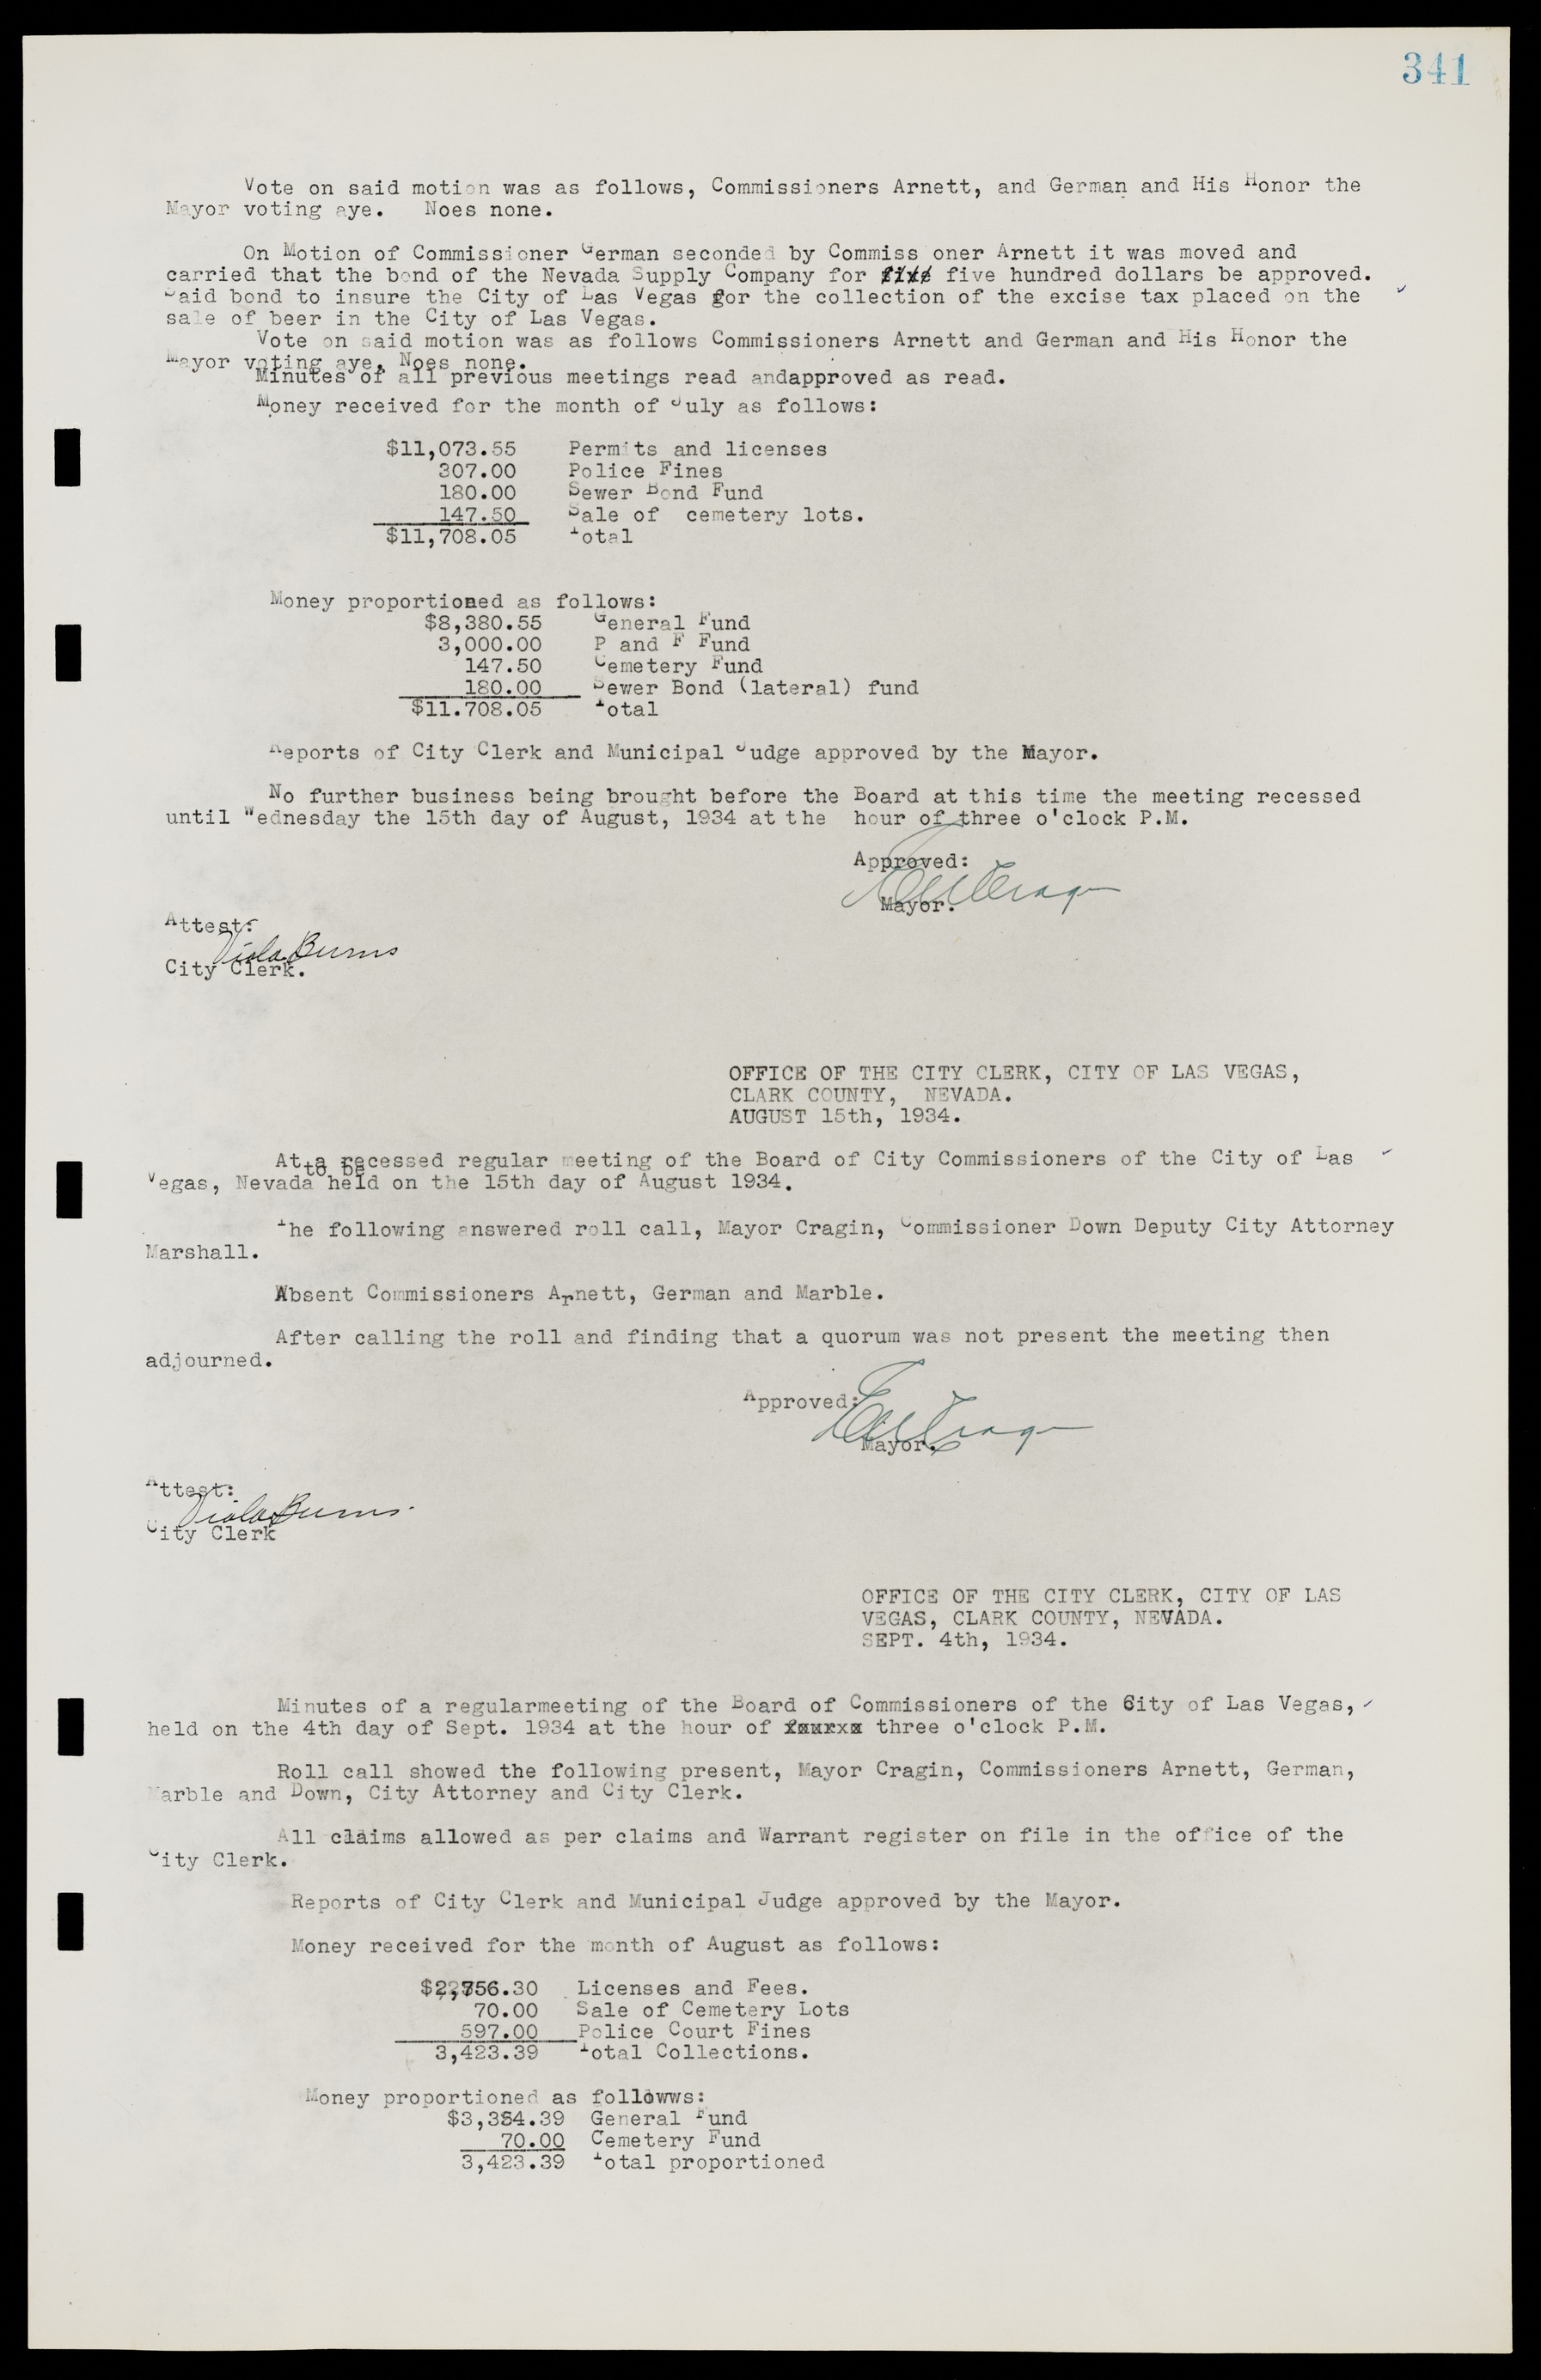 Las Vegas City Commission Minutes, May 14, 1929 to February 11, 1937, lvc000003-348